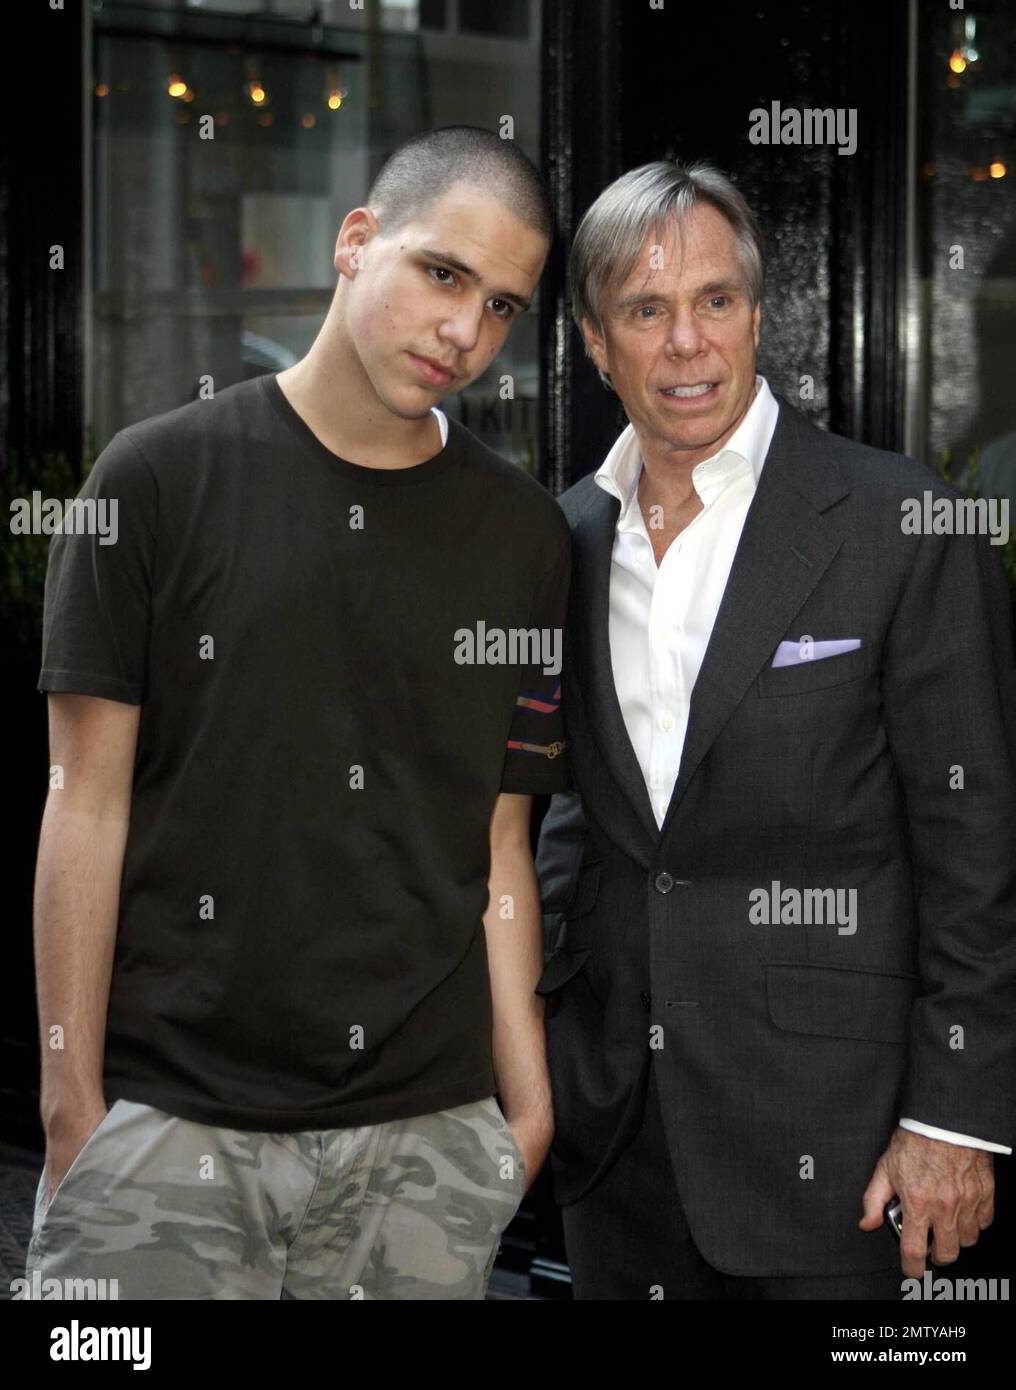 https://c8.alamy.com/comp/2MTYAH9/tommy-hilfiger-and-son-rich-who-is-co-ceo-of-young-rich-and-famous-entertainment-make-their-way-back-into-a-hotel-in-soho-ny-10407-all-2MTYAH9.jpg